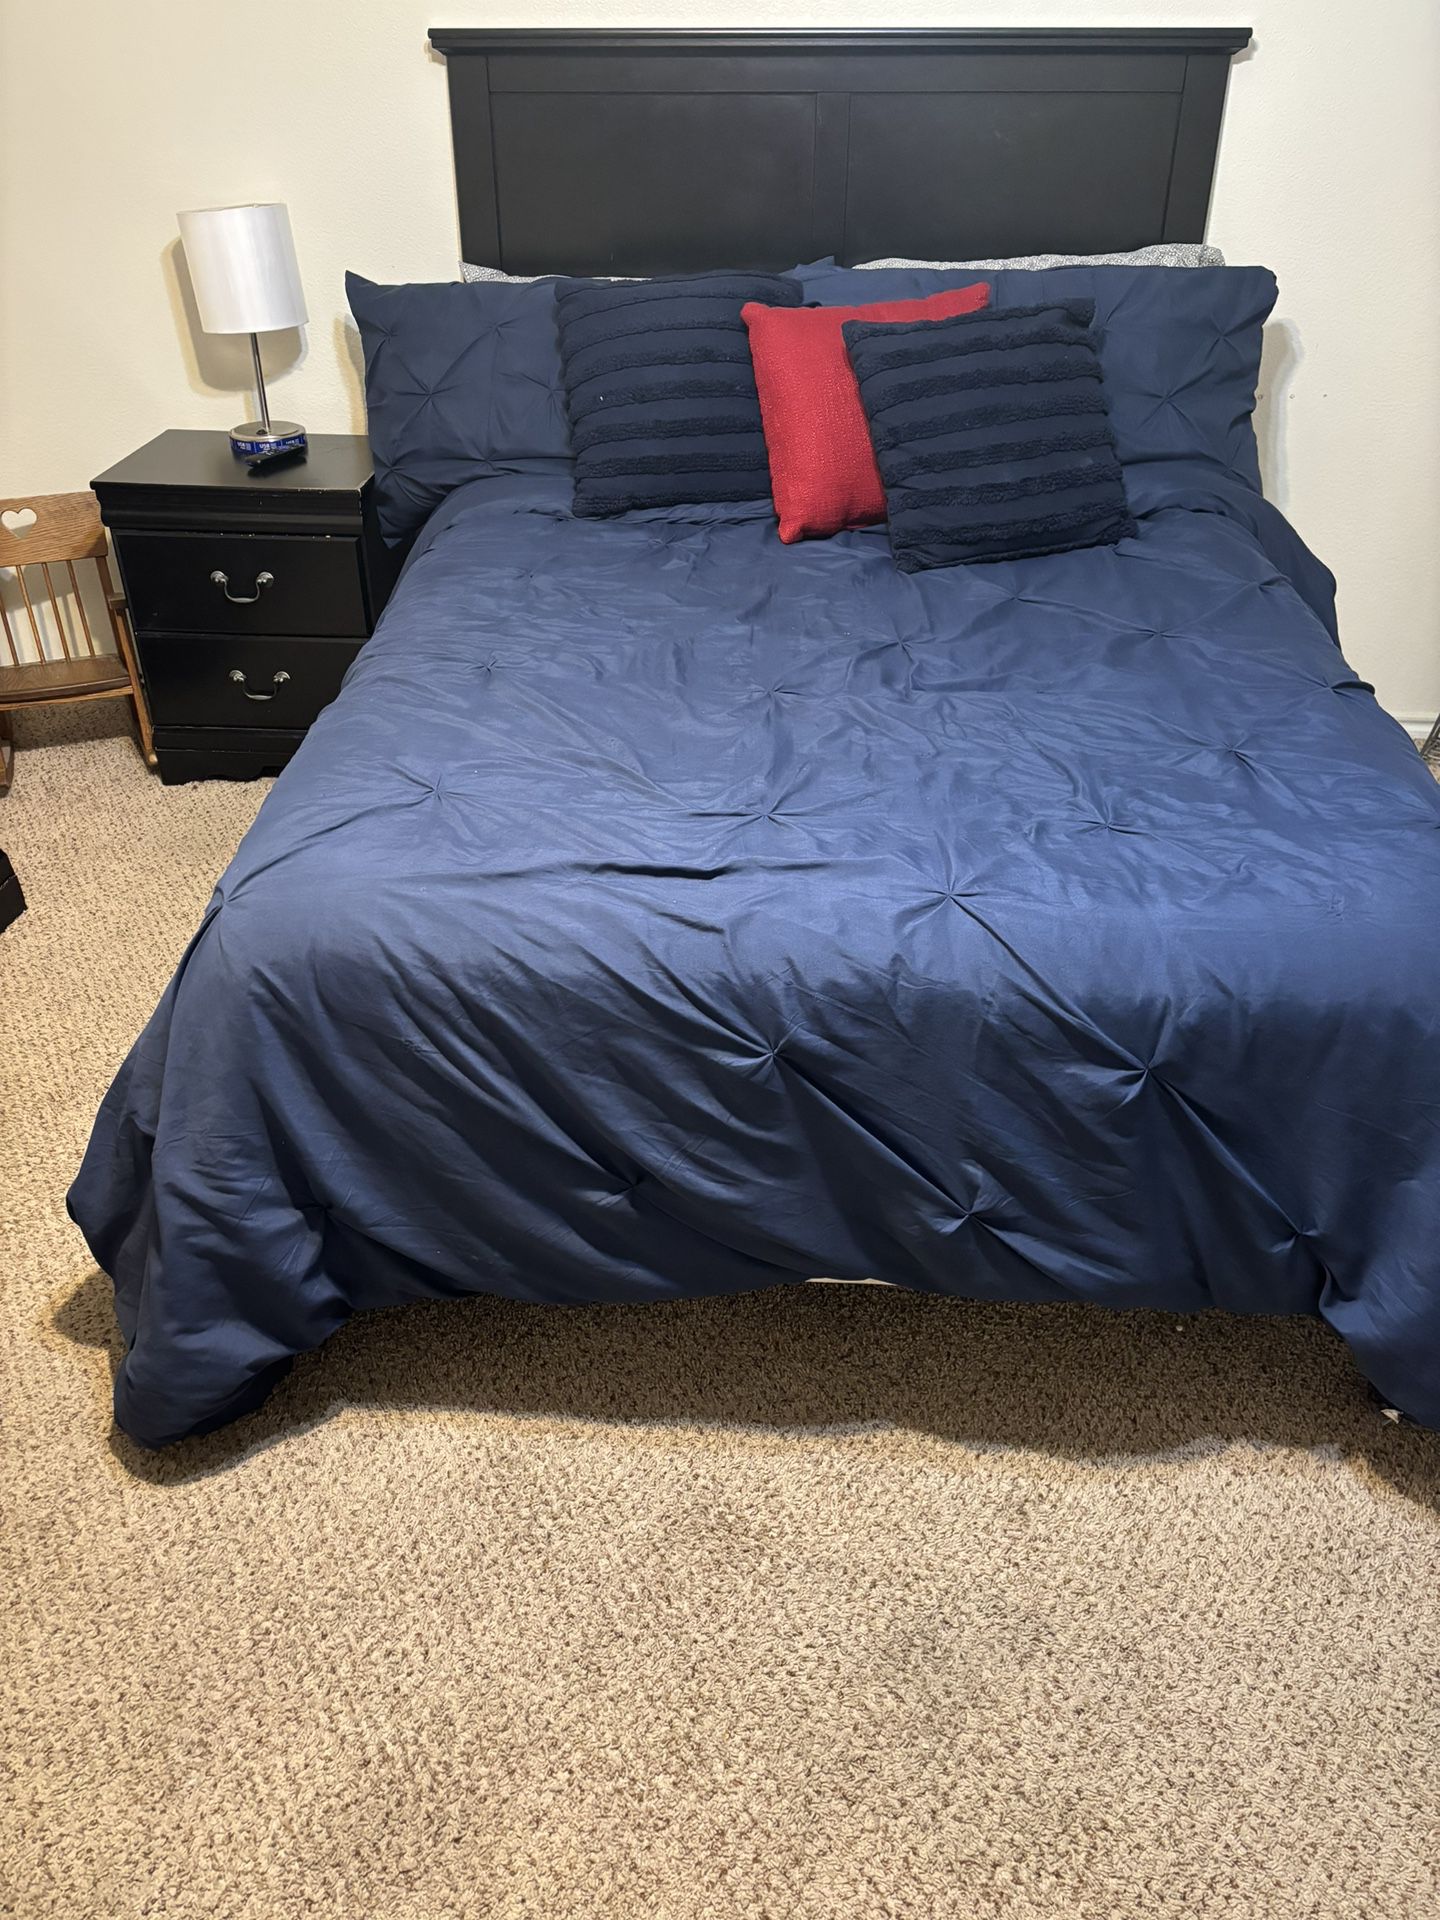 Full size bed  